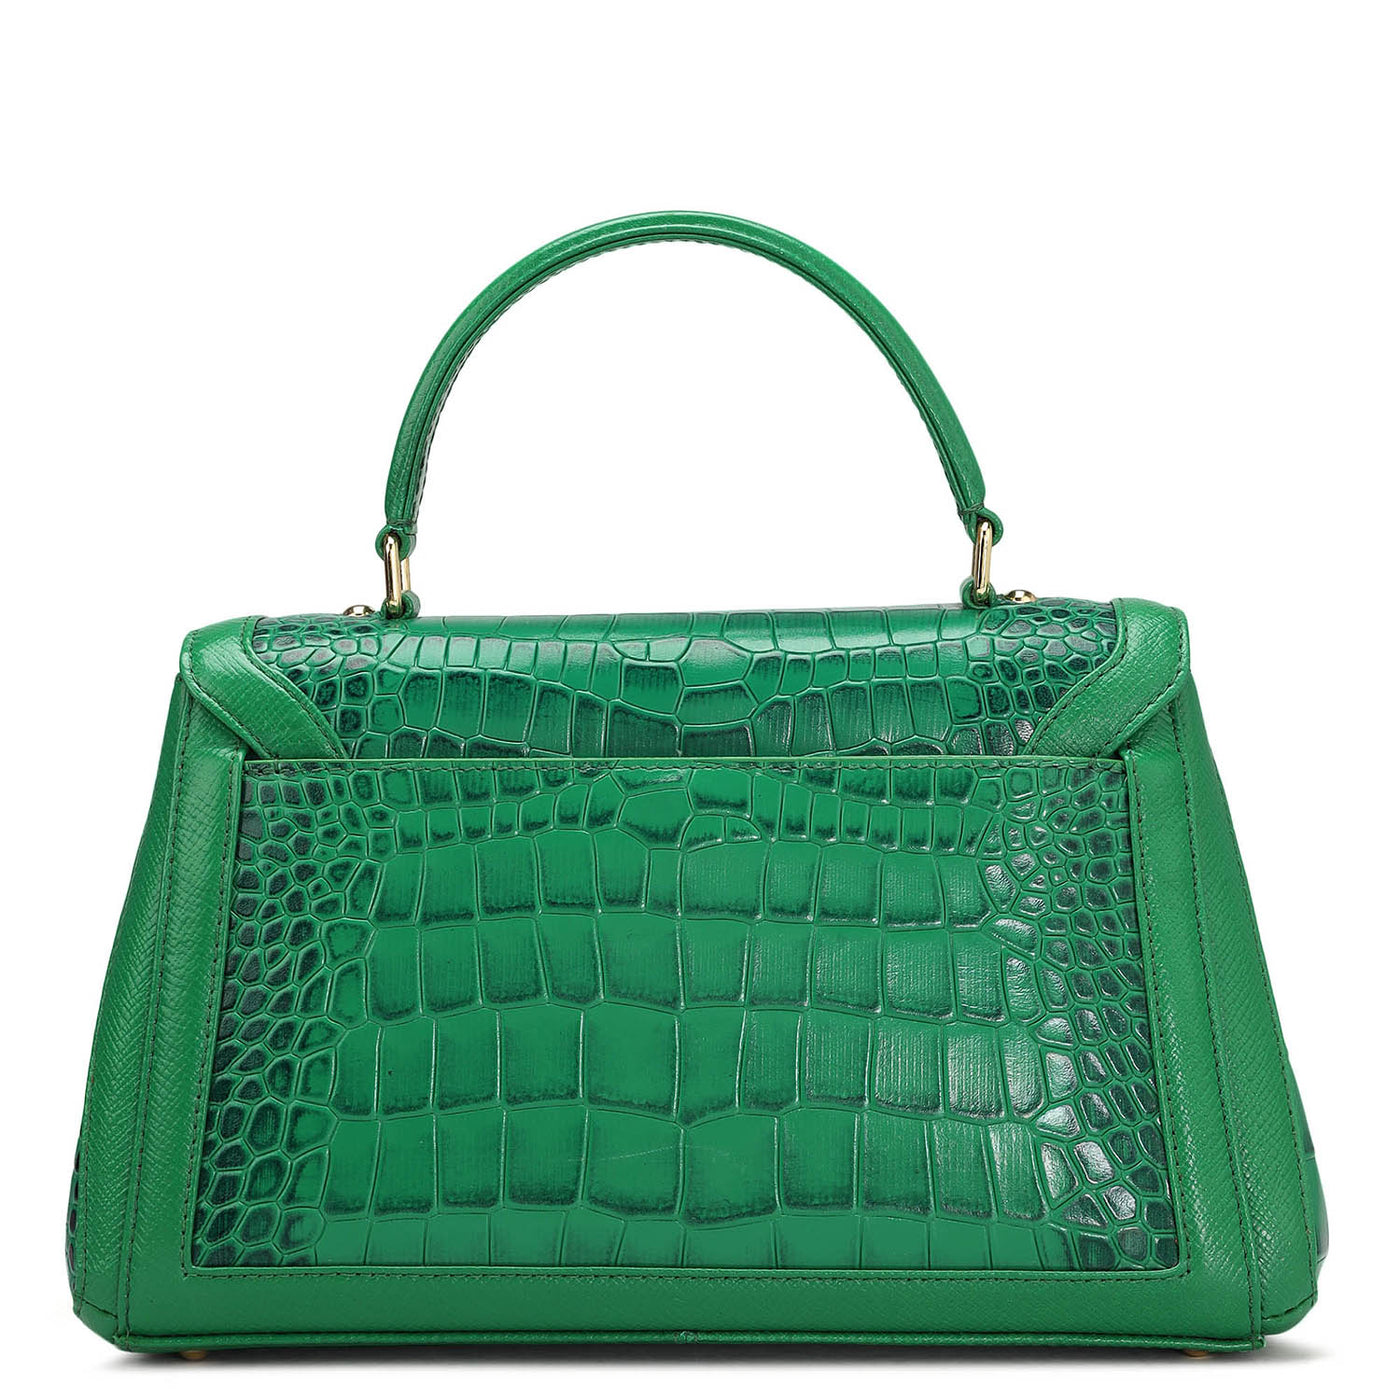 Small Croco Leather Satchel - Sea Weed